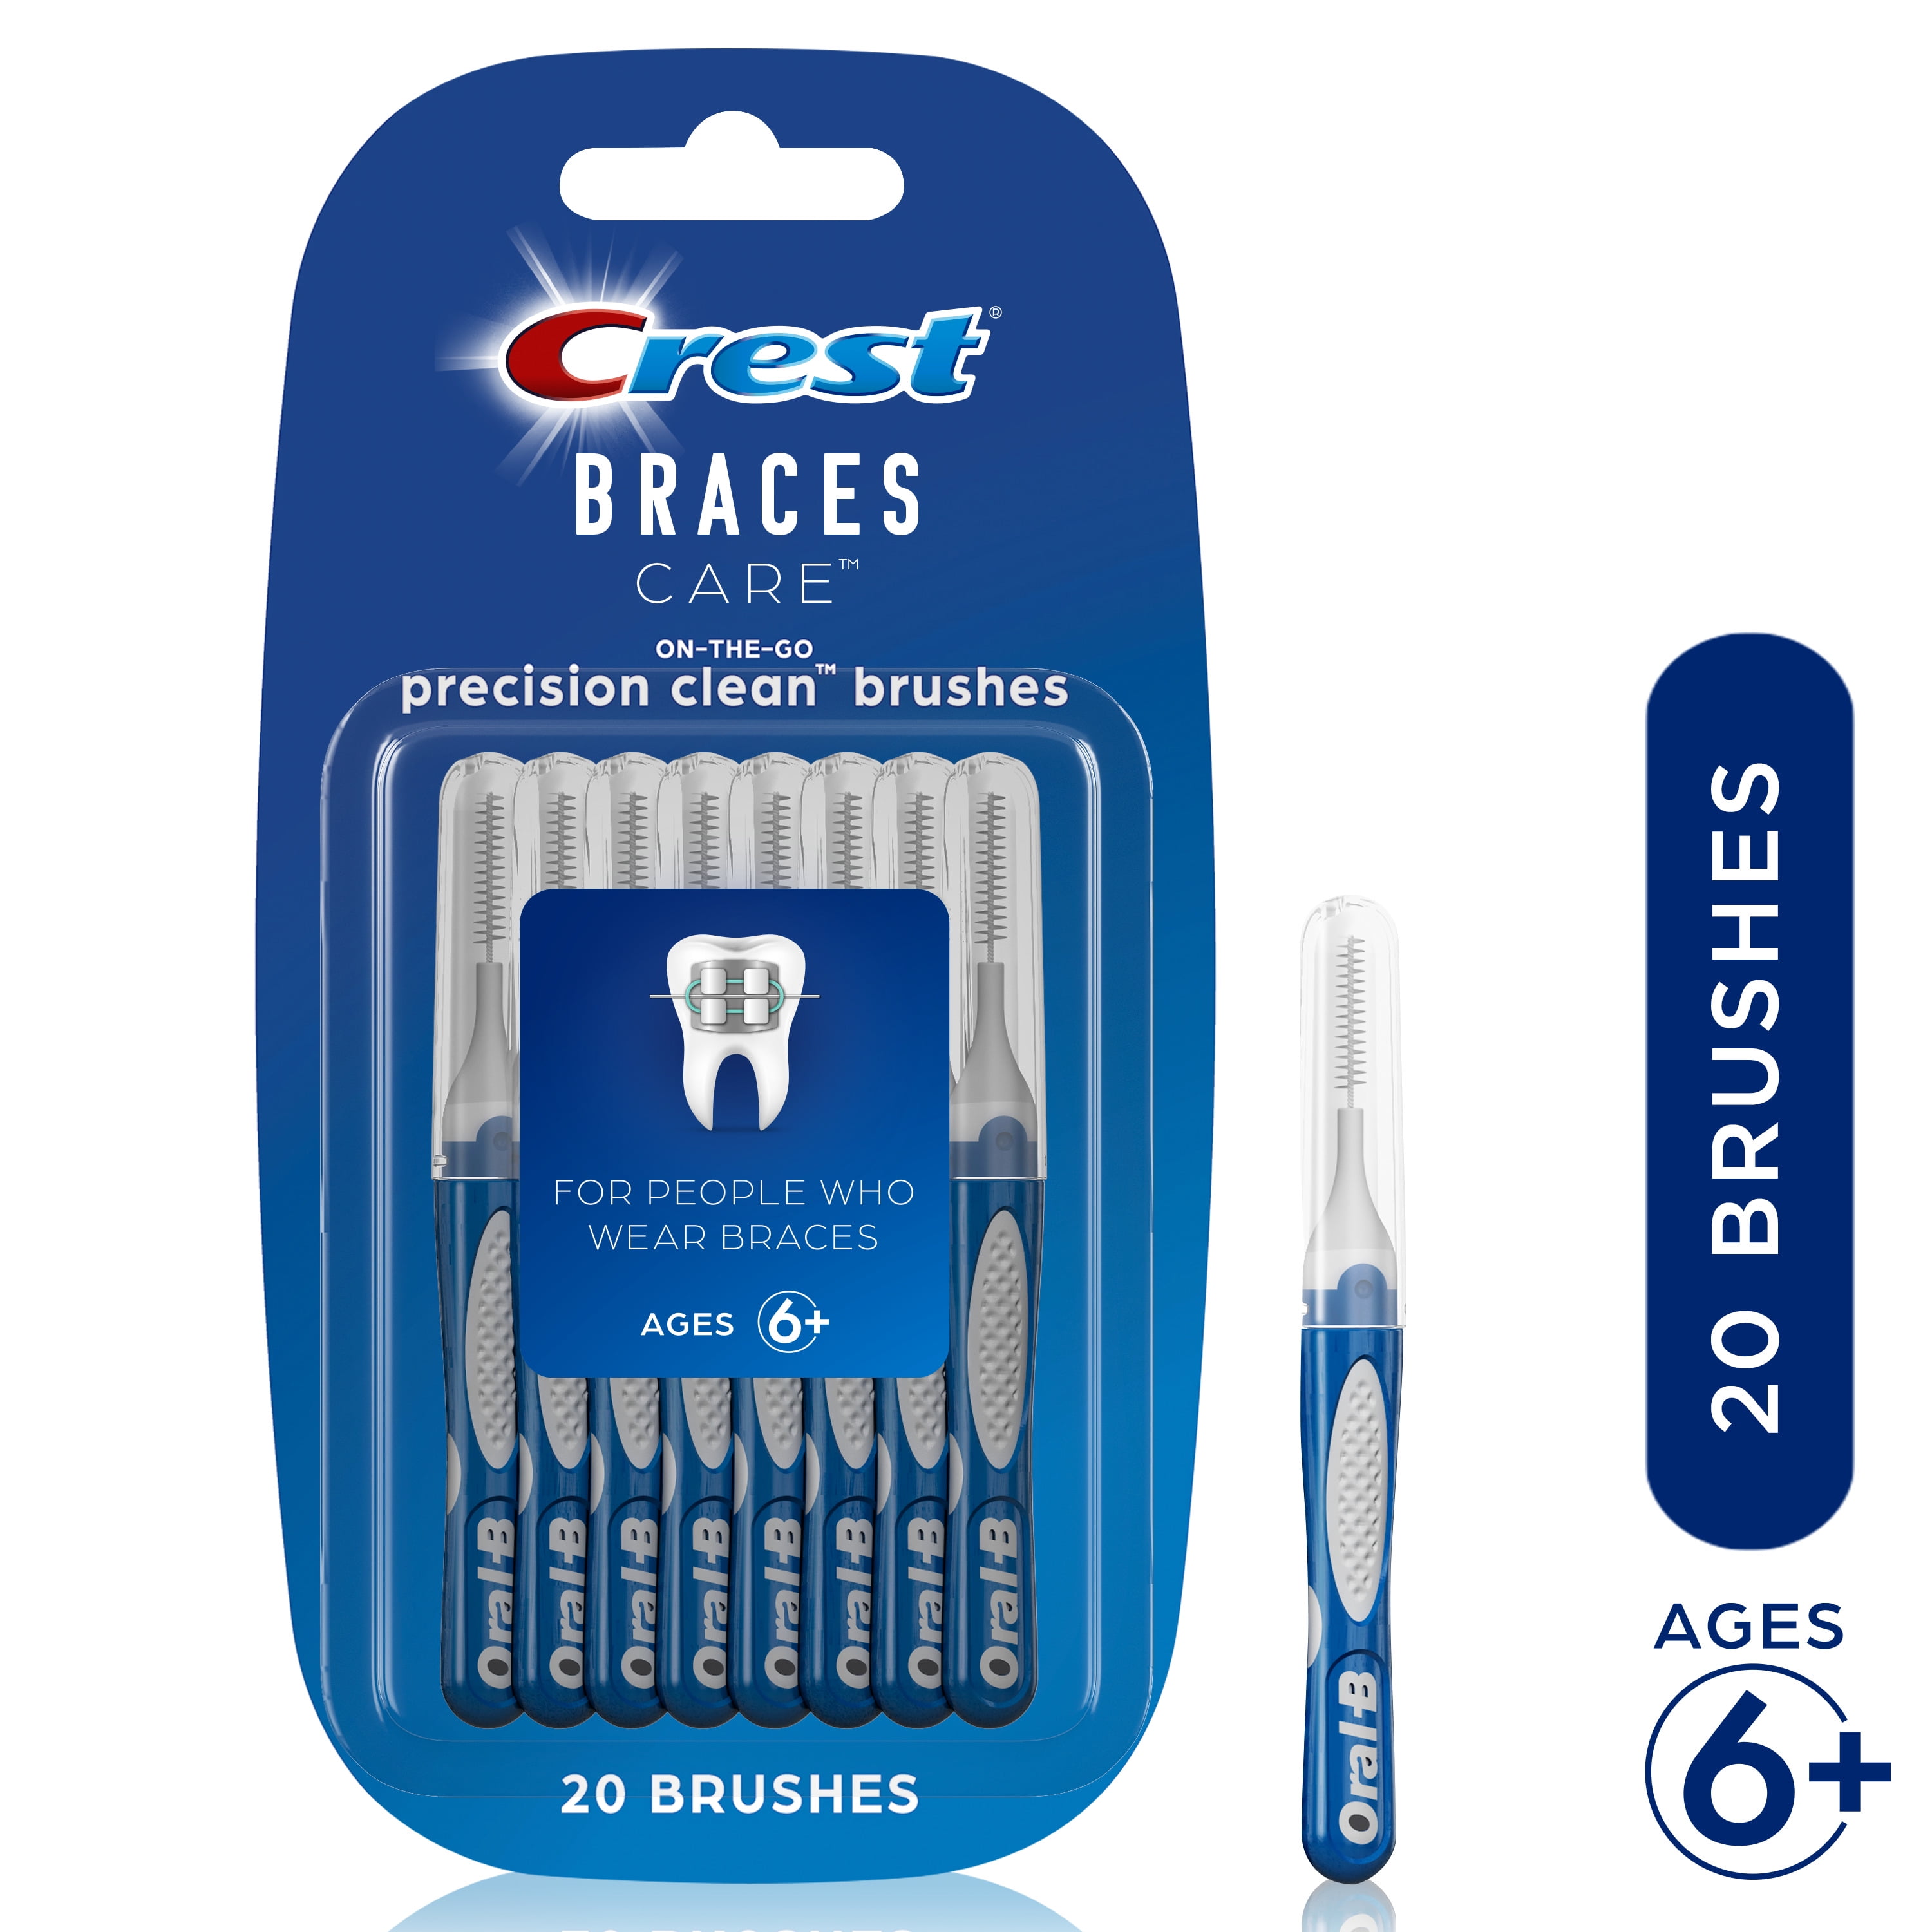 Crest Braces Care Precision Clean Brushes (20ct), For Ages 6+